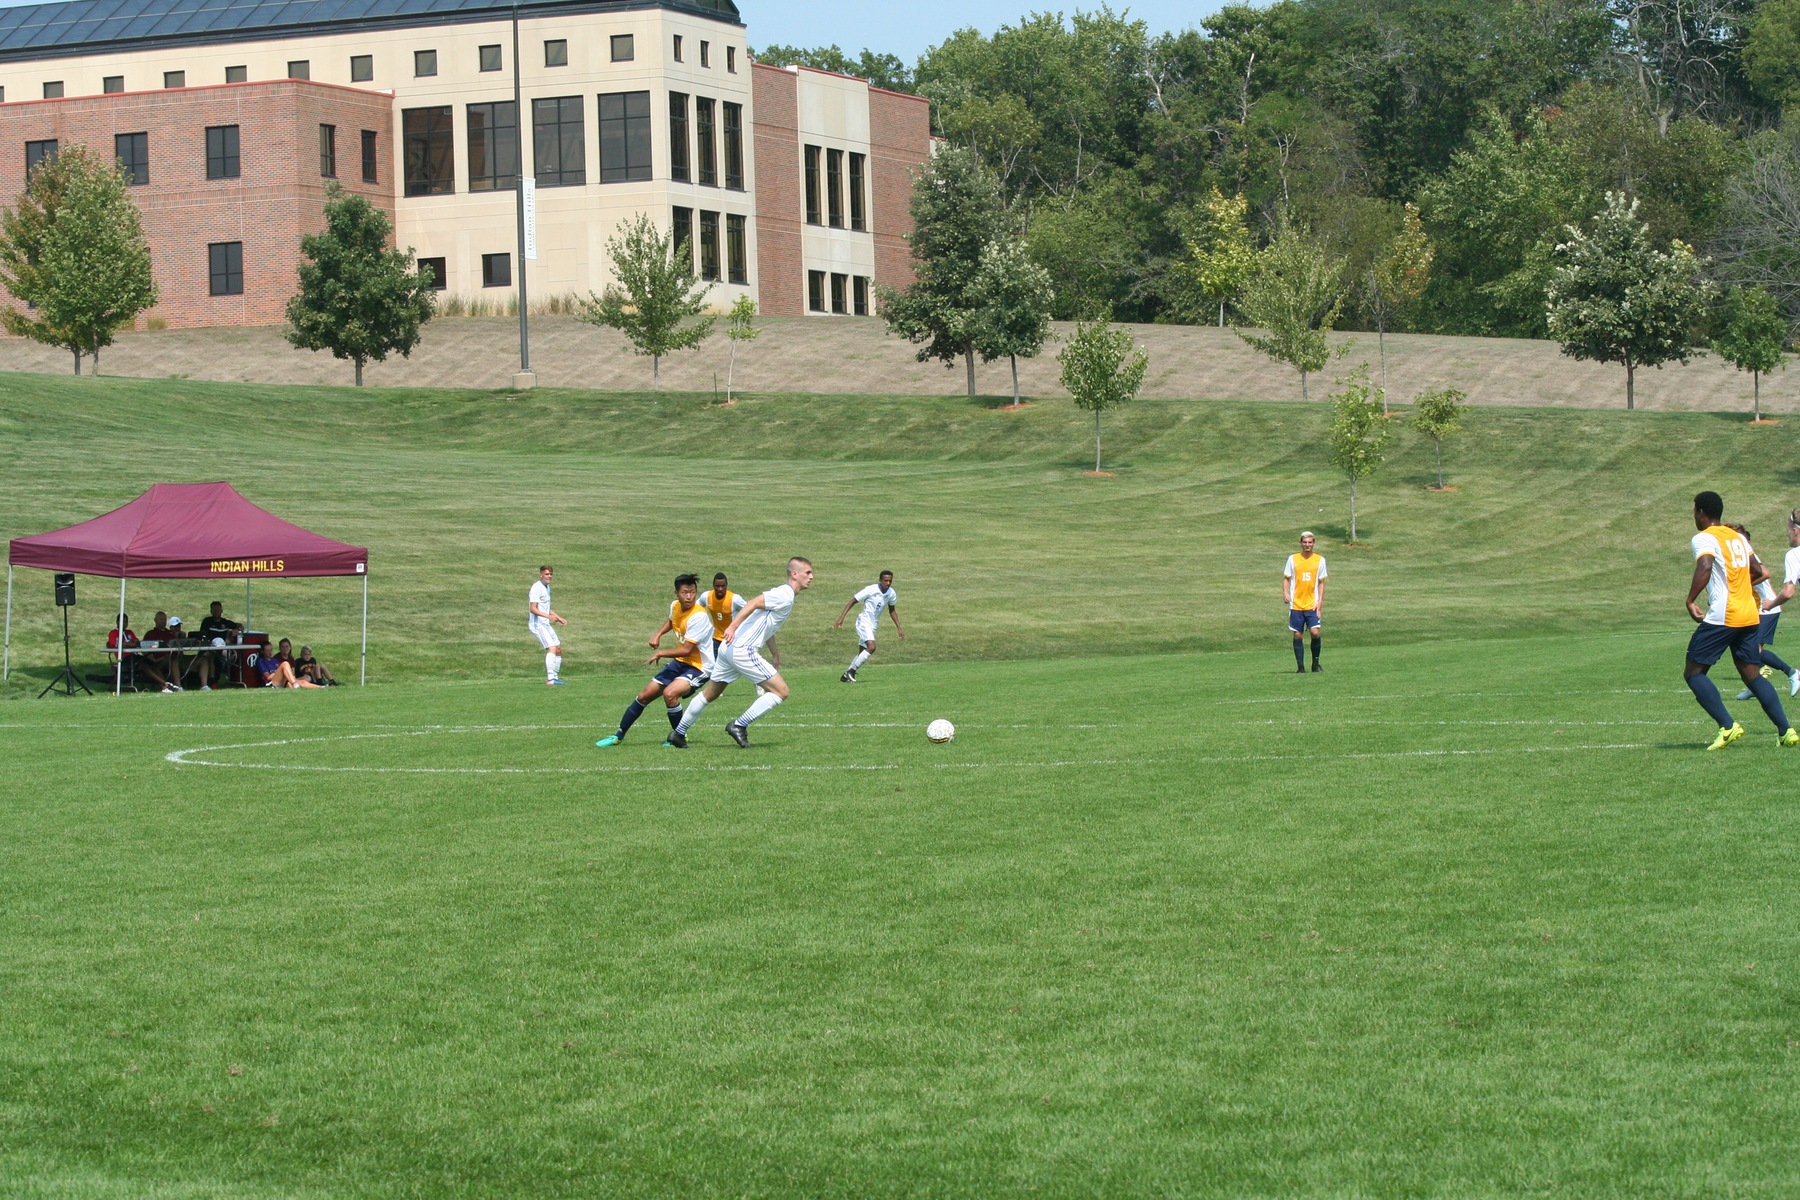 Lakers lose Conference opener 3-2 to Northeast Community College